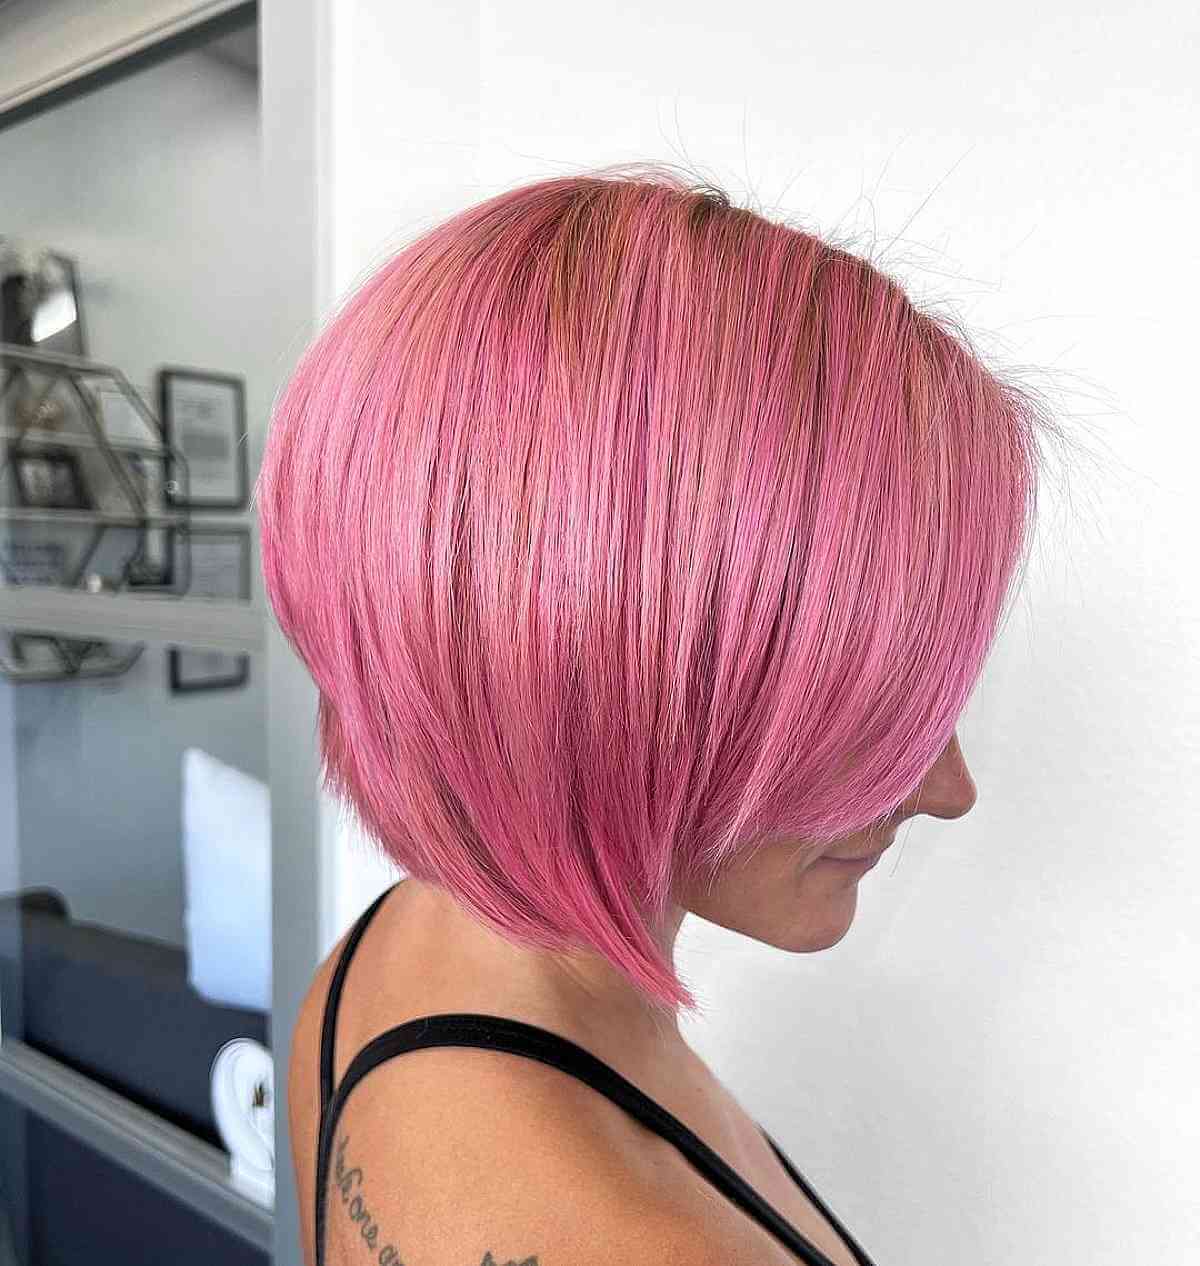 55 Hottest Pink Hair Color Ideas - From Pastels to Neons